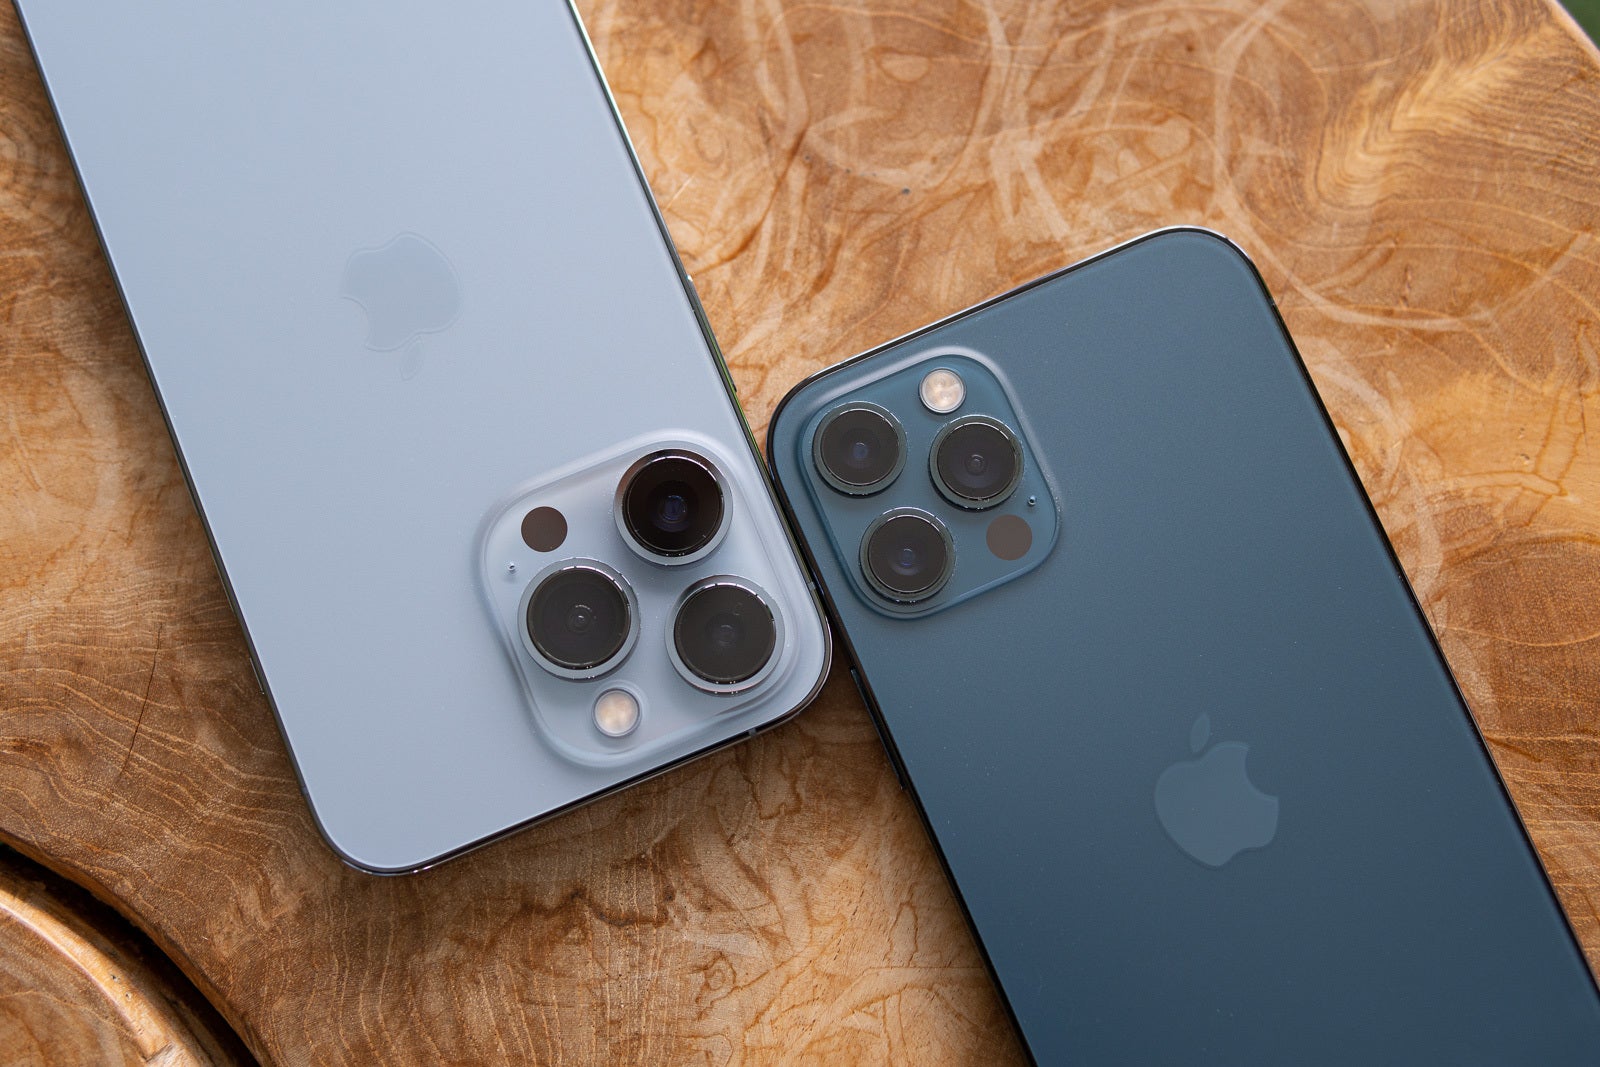 (image credit PhoneArena) iPhone 13 Pro and iPhone 12 Pro camera comparison - iPhone 13 Pro vs iPhone 12 Pro: a worthy upgrade?